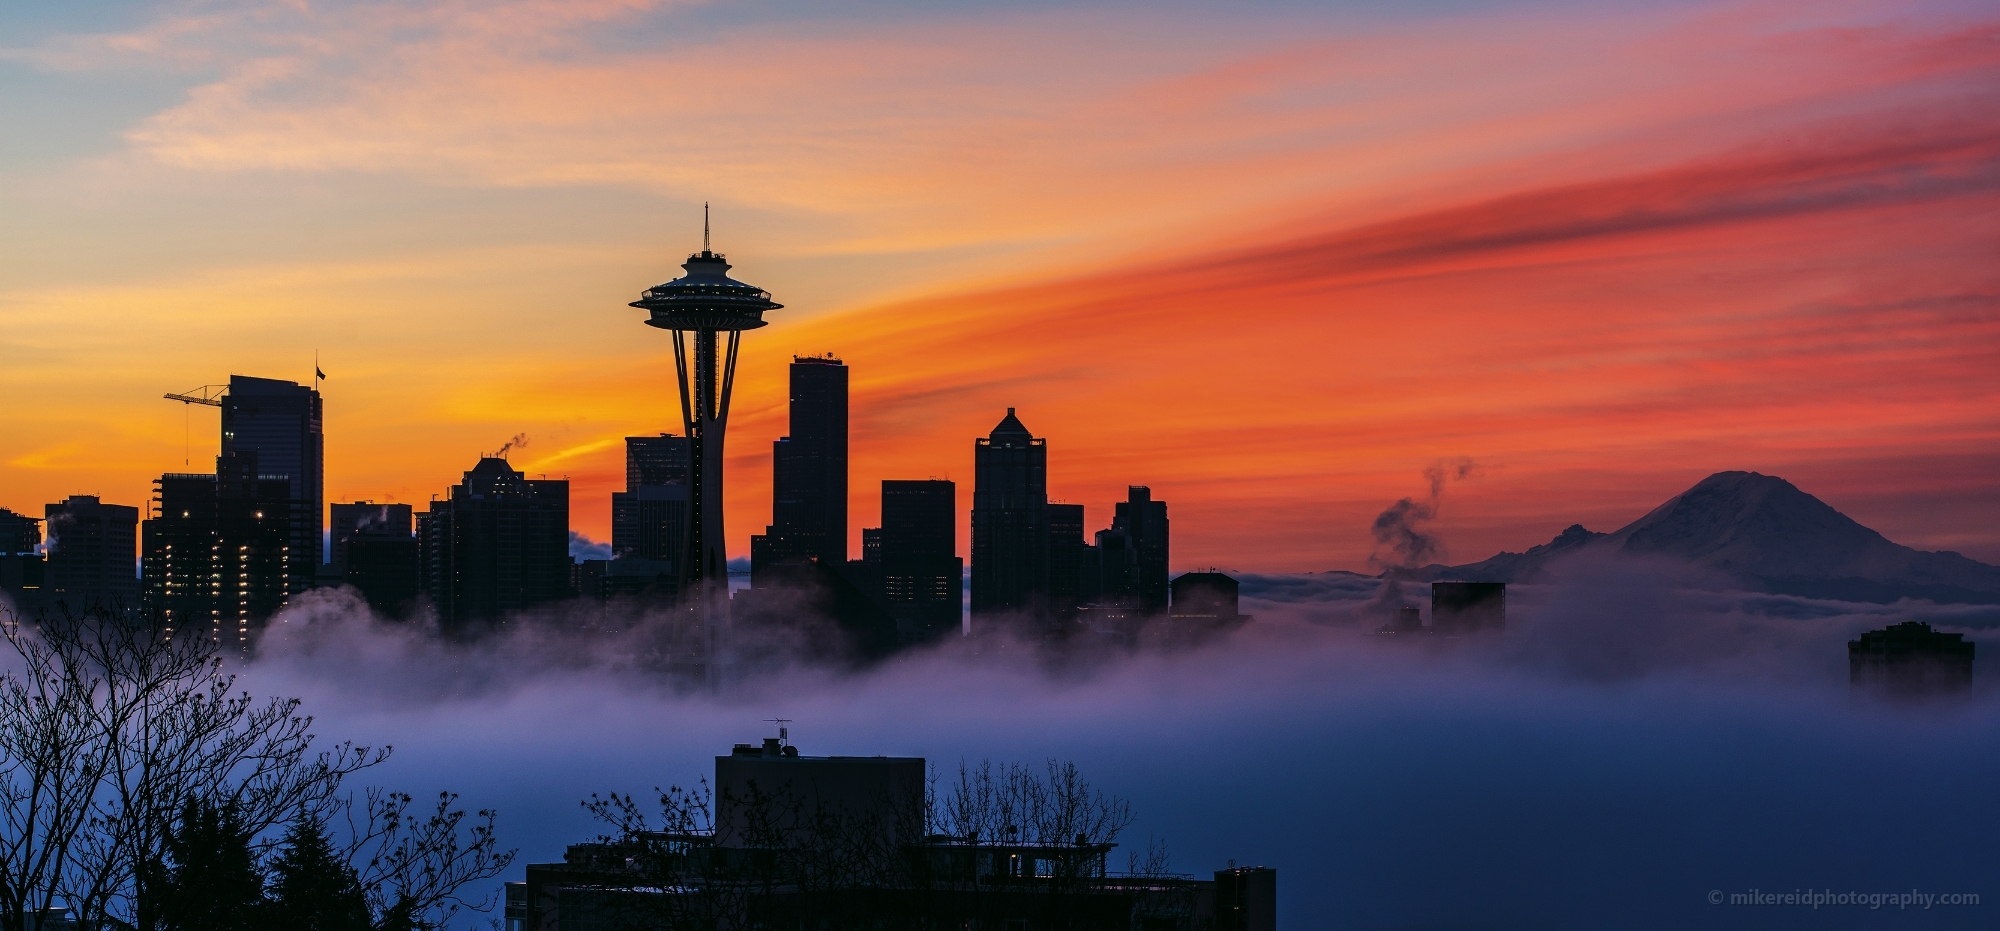 Seattle Sunrise Fogscape from Kerry Park.jpg Photography from Seattles Kerry Park is iconic. Everyone wants to go there when they visit to take That Shot. I love being there at sunrise or sunset to see how the light is highlighting the city and Mount Rainier. Contact me for custom Seattle photography tours.